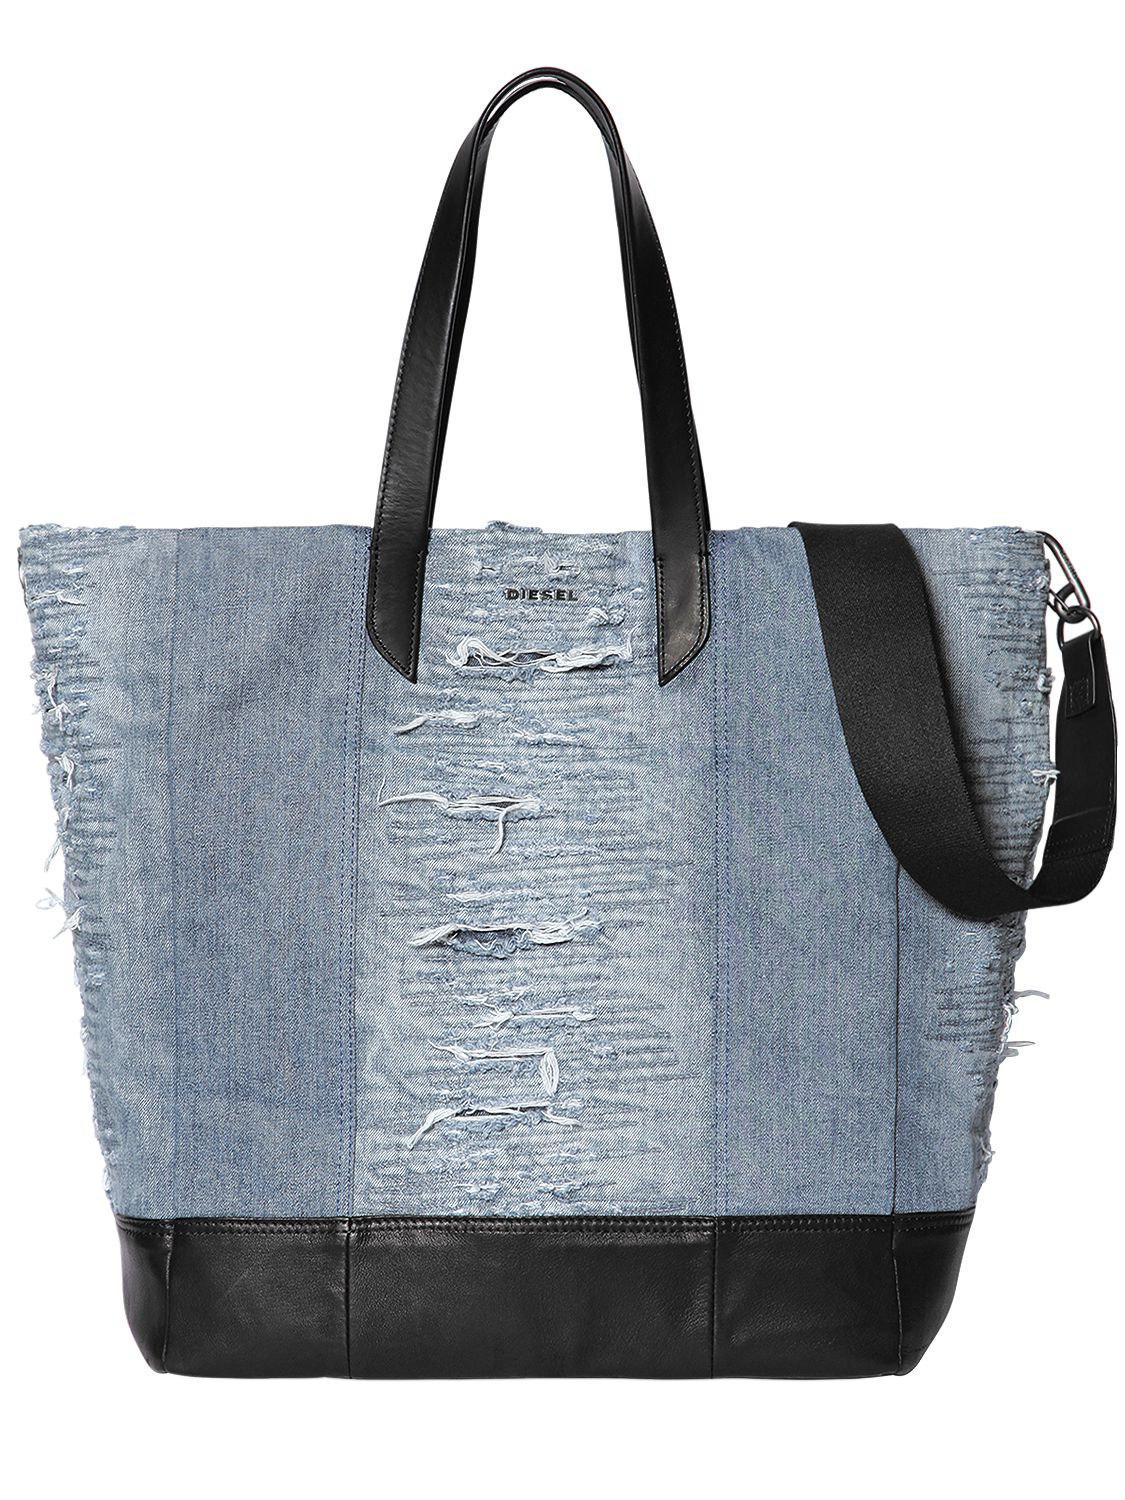 DIESEL Ripped Denim Tote Bag W/ Leather Details in Blue - Lyst